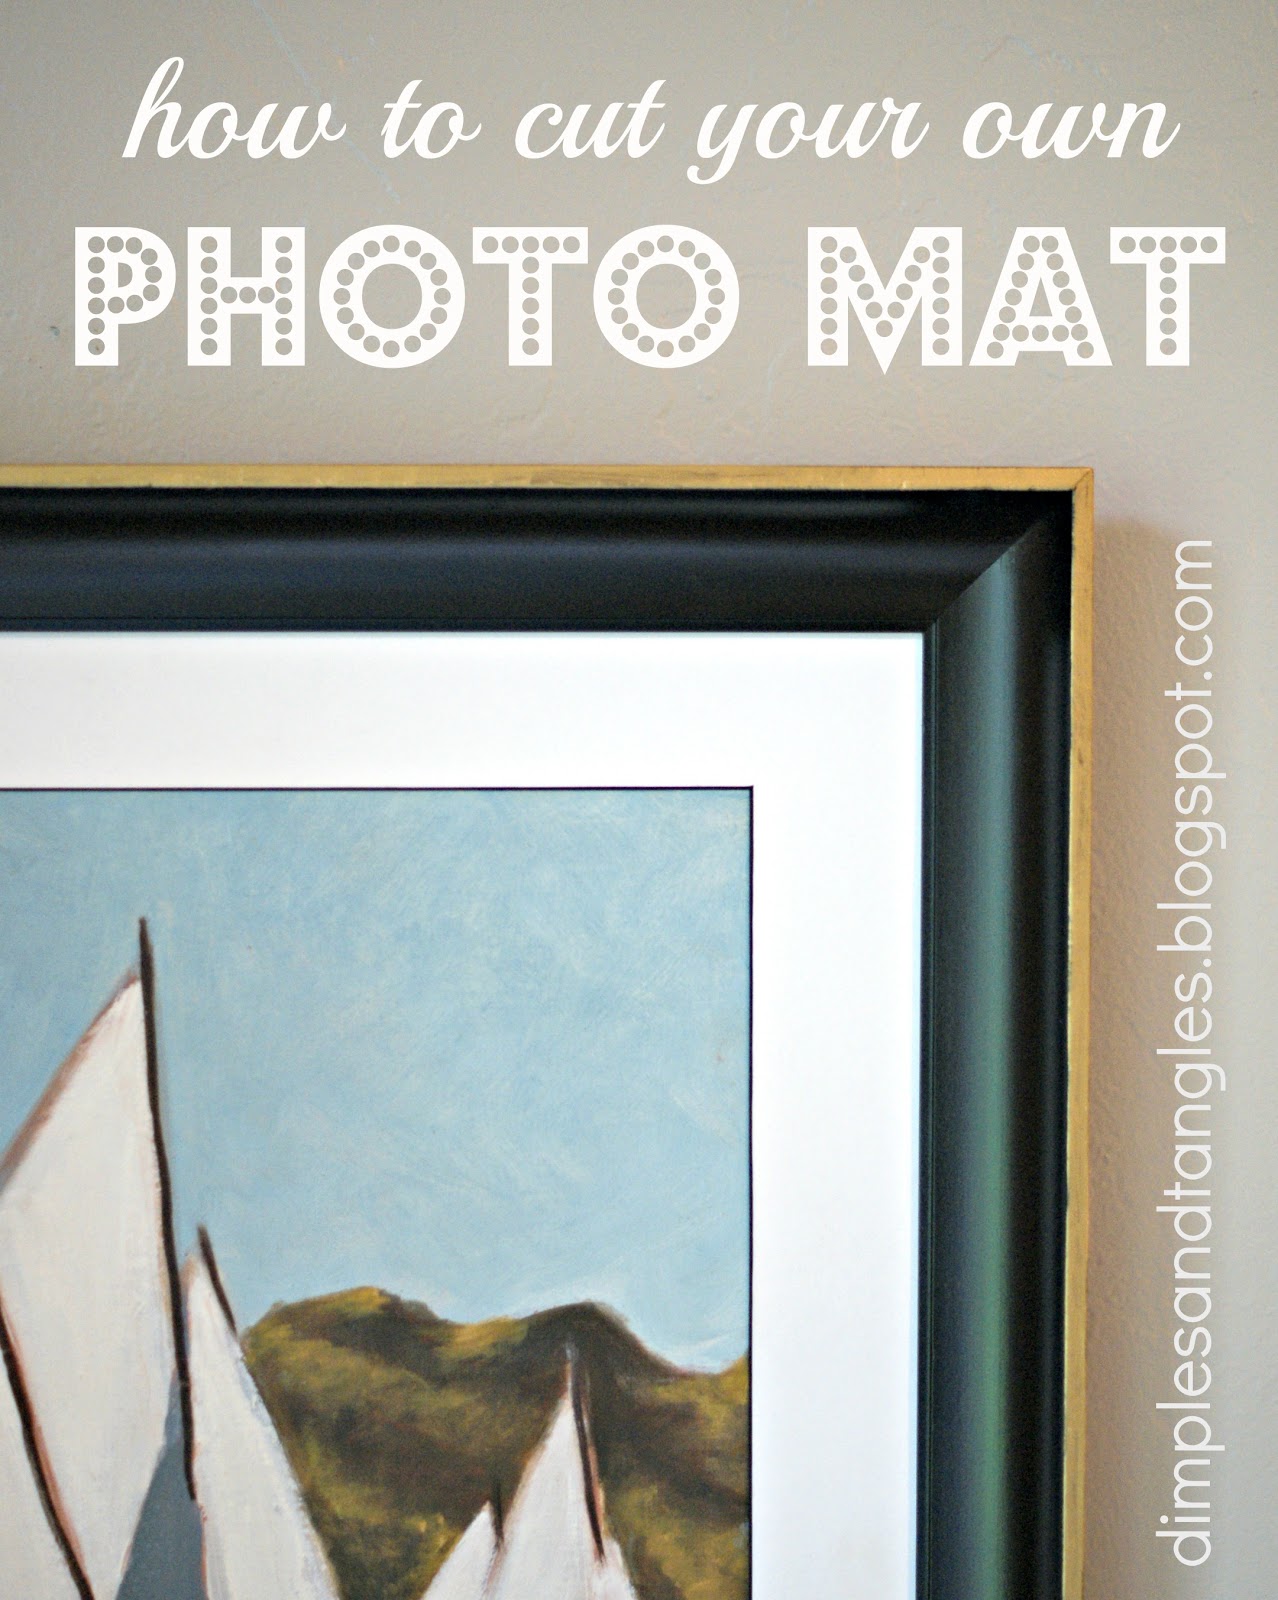 HOW TO CUT YOUR OWN PHOTO MAT